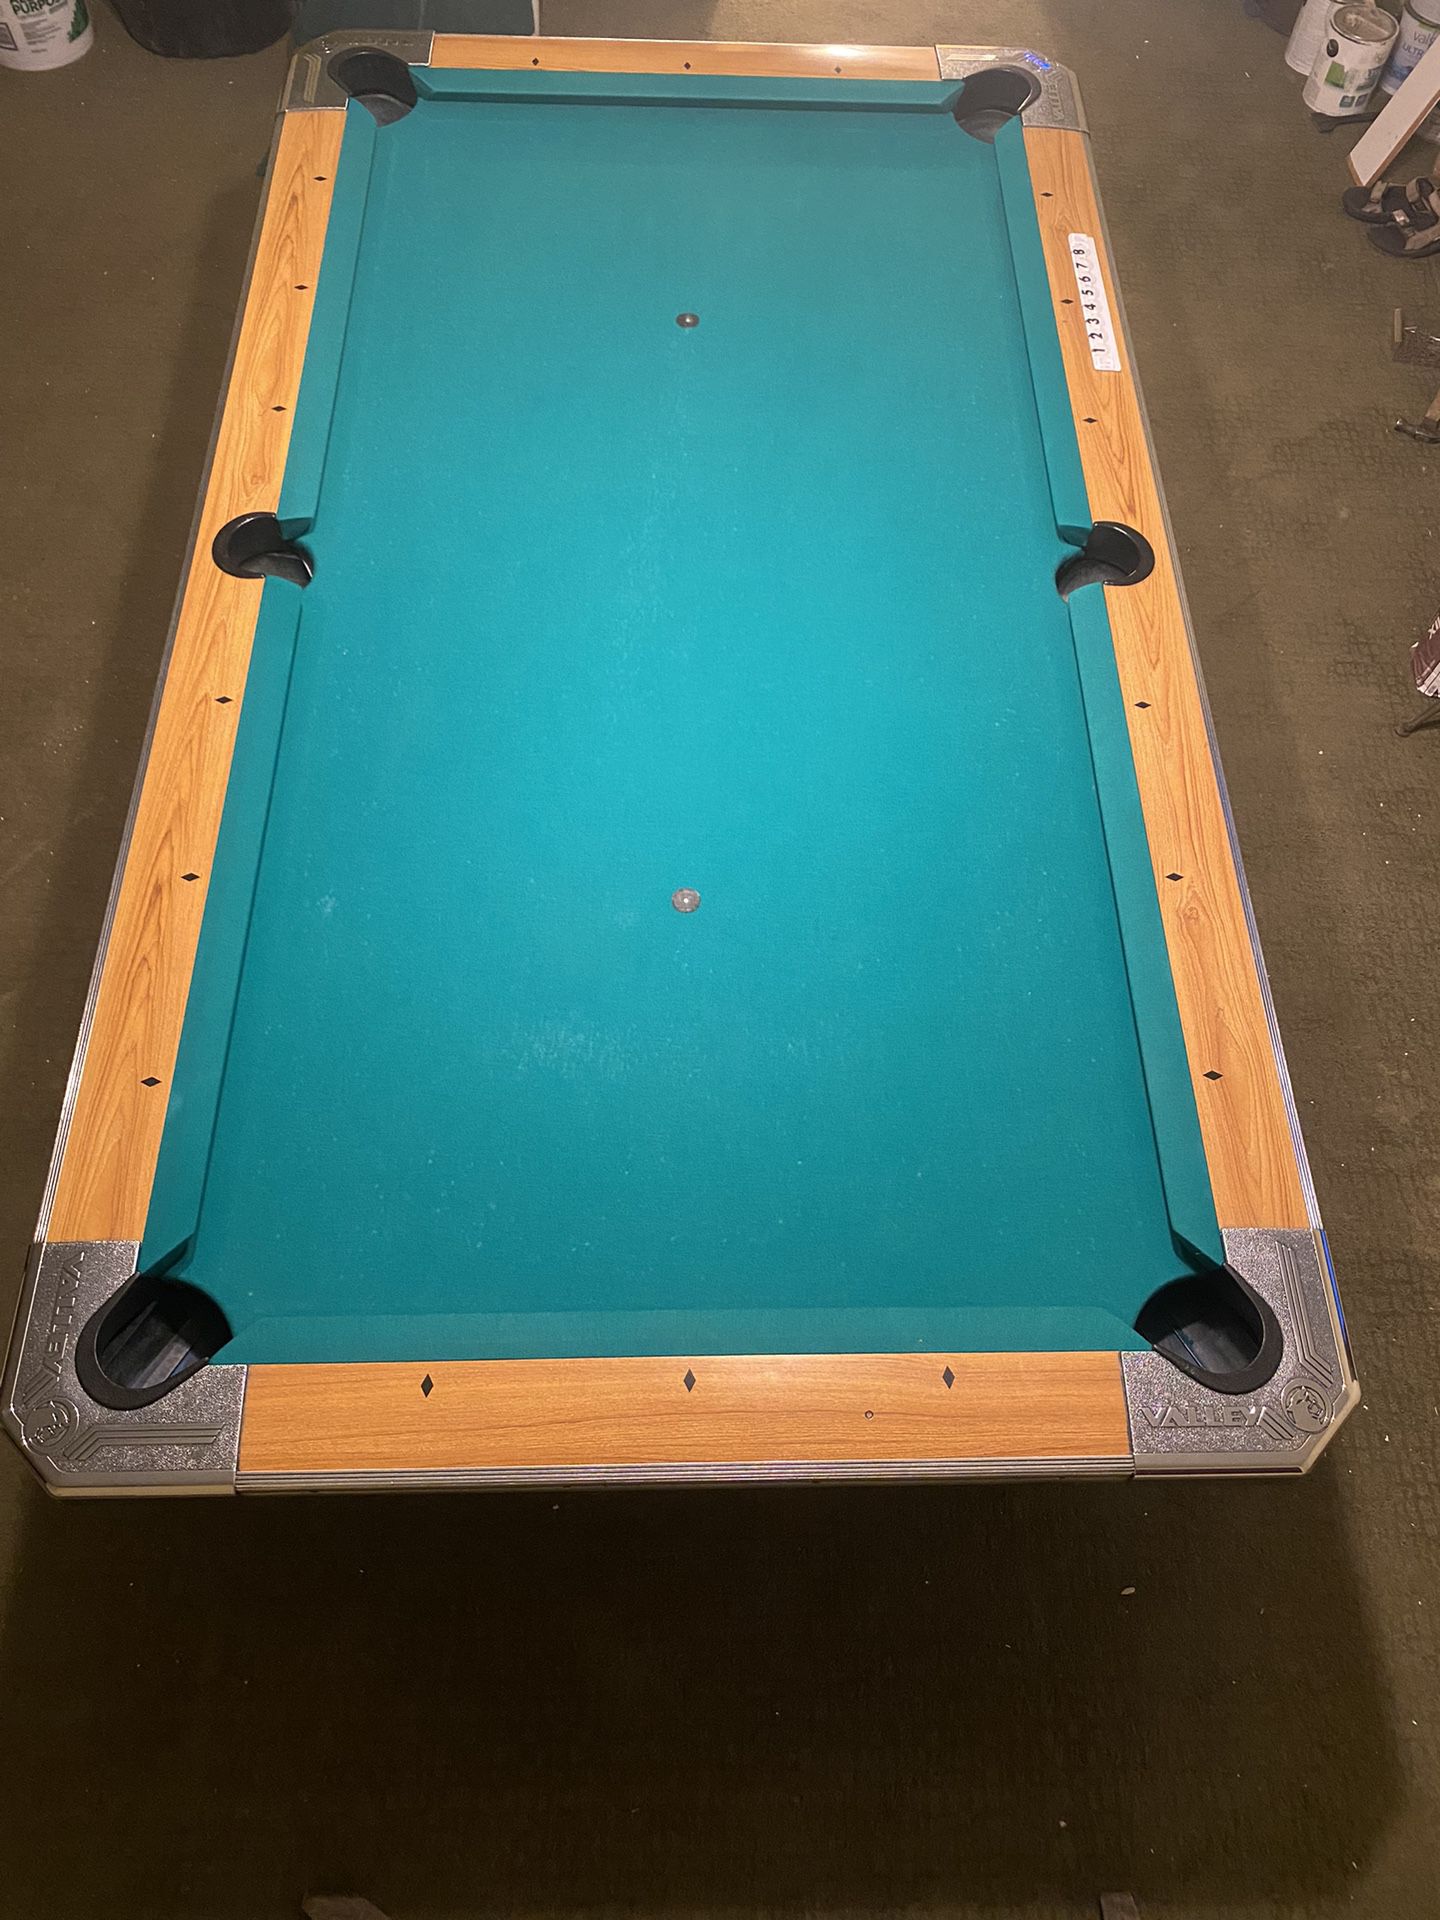 Valley Pool Table - Exchange For Car 